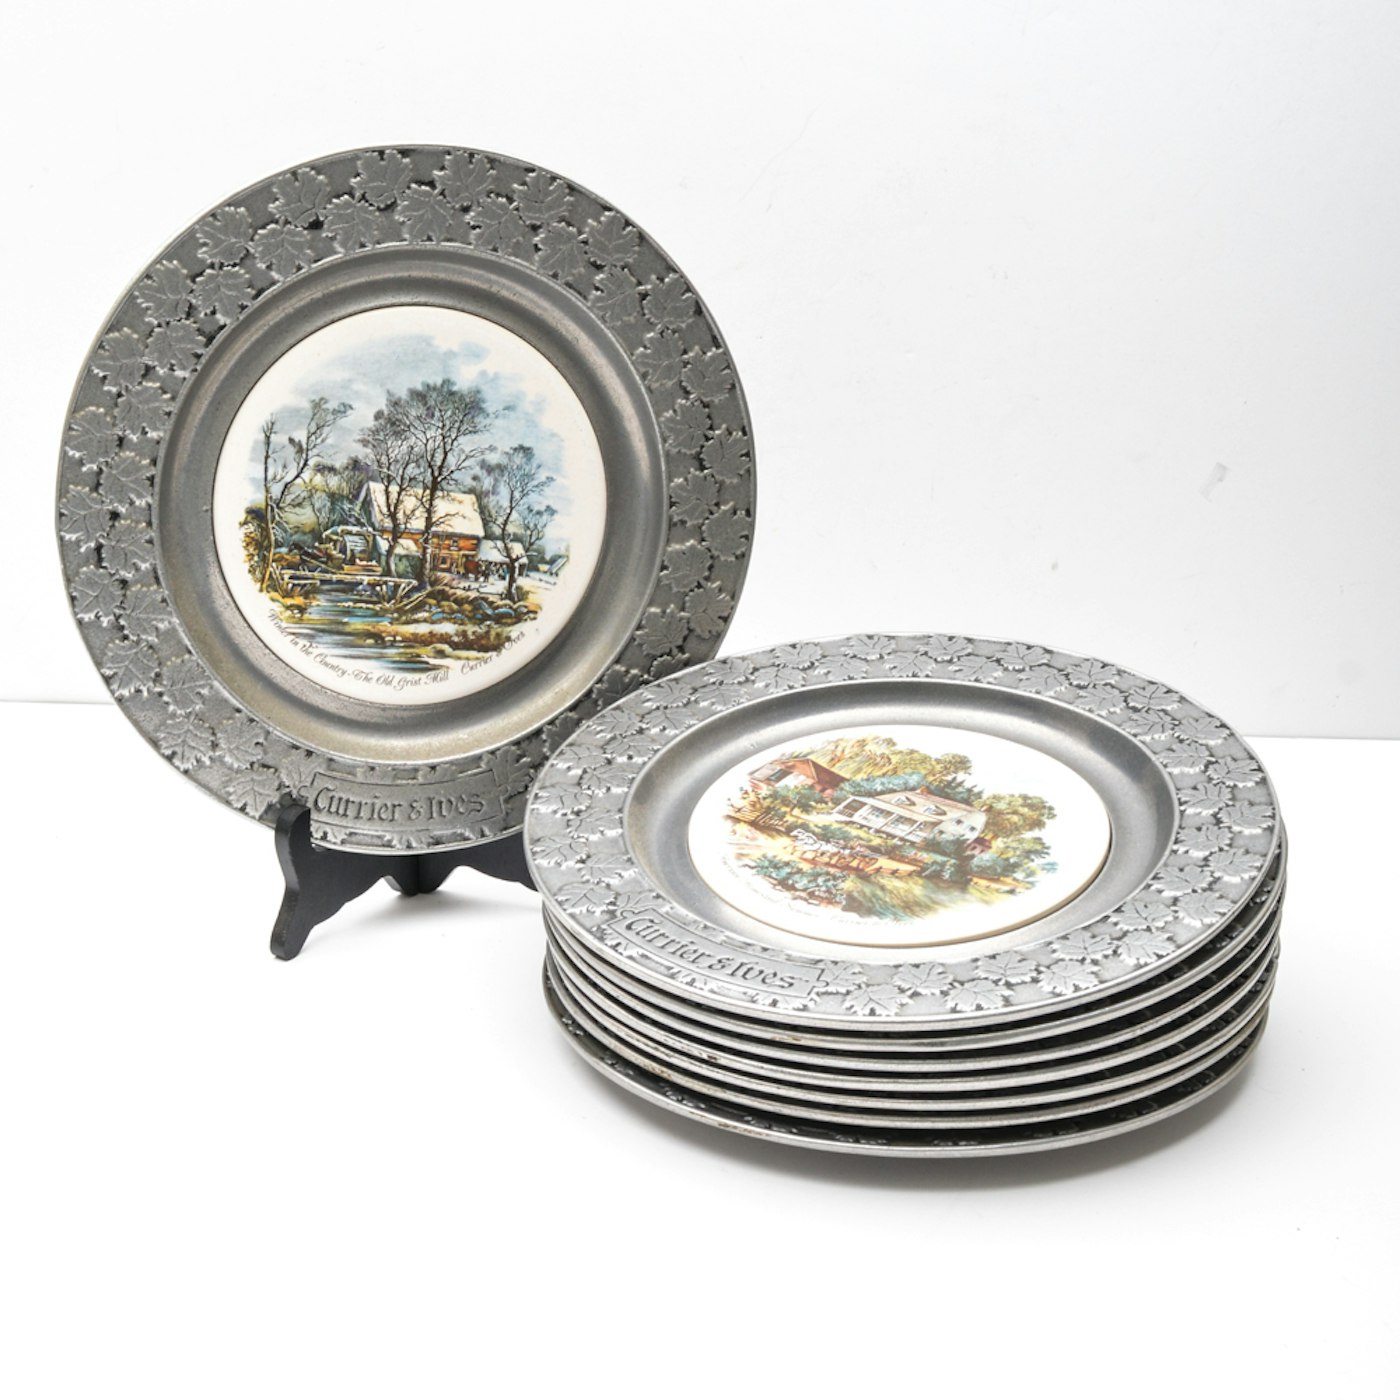 Vintage Currier & Ives Collector's Plates by Carson | EBTH